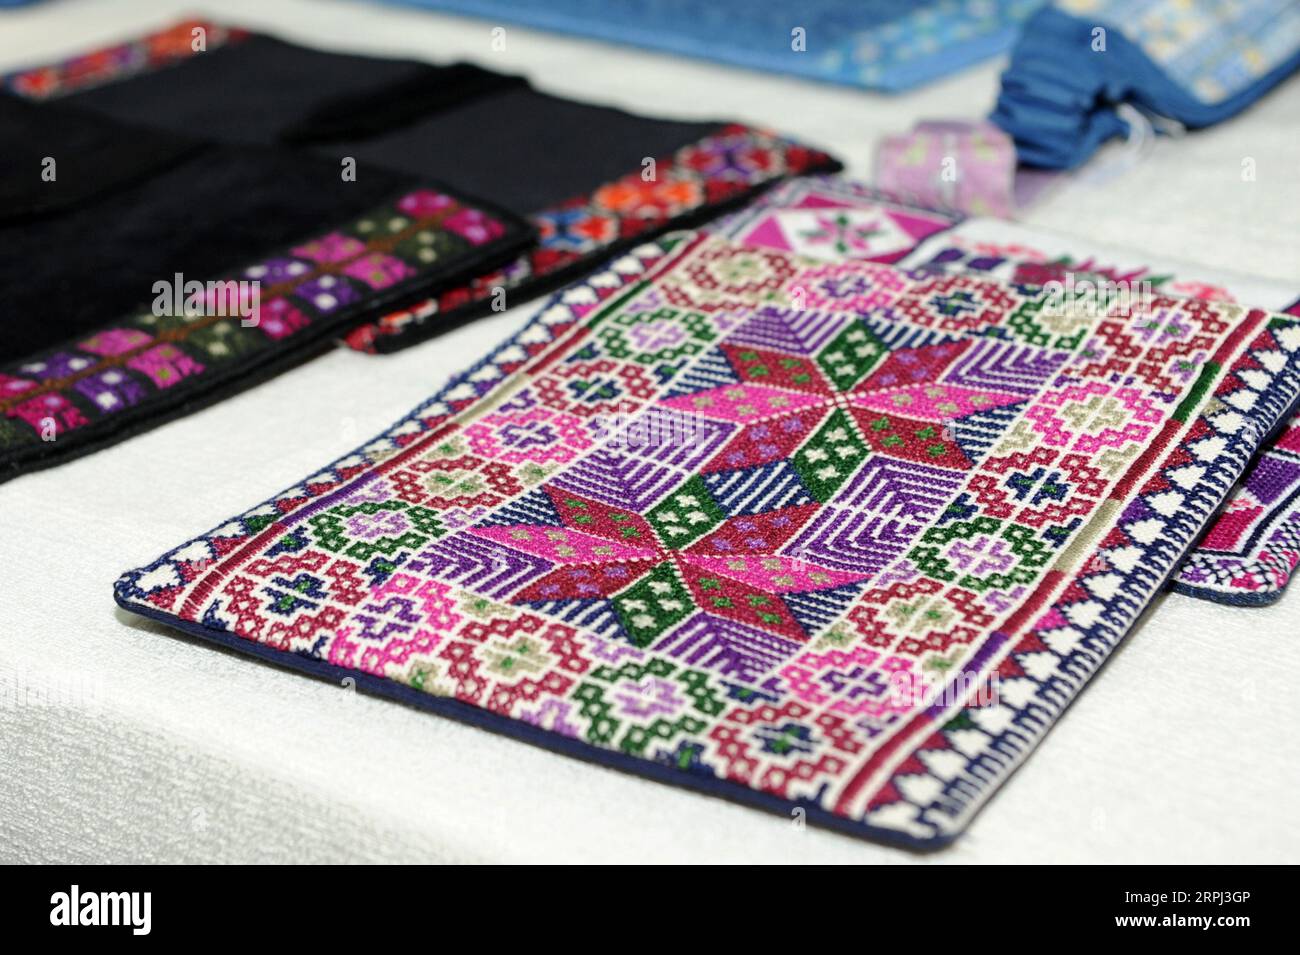 191125 -- KUWAIT CITY, Nov. 25, 2019 Xinhua -- Exhibits are seen at a Palestinian cultural exhibition in Kuwait City, Kuwait, Nov. 25, 2019. A Palestinian cultural exhibition organized by Kuwaiti National Council for Culture, Arts and Letters NCCAL was held here on Monday, showcasing Palestinian embroidery, ceramic, wooden artworks and popular folk food. The exhibition will last until Nov. 28. Photo by Ghazy Qaffaf/Xinhua KUWAIT-KUWAIT CITY-PALESTINE-CULTURAL EXHIBITION PUBLICATIONxNOTxINxCHN Stock Photo